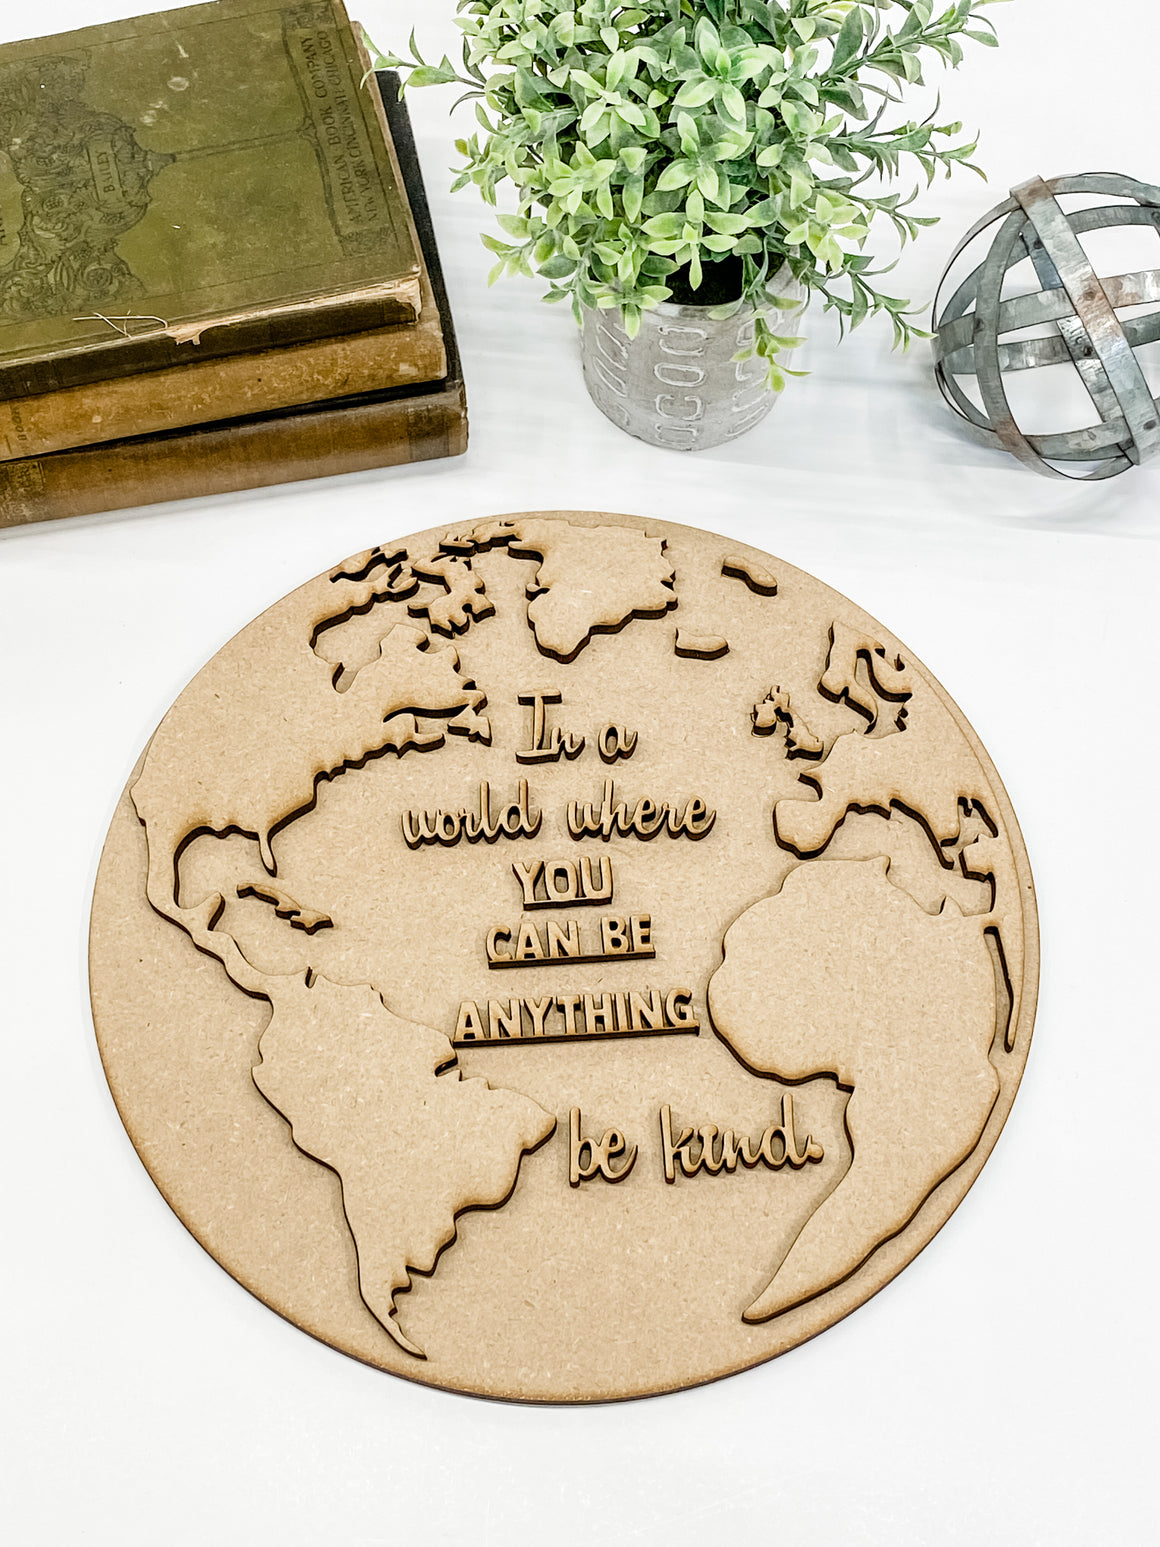 DIY Wall Art Kit | Globe | In a world where you can be anything be kind